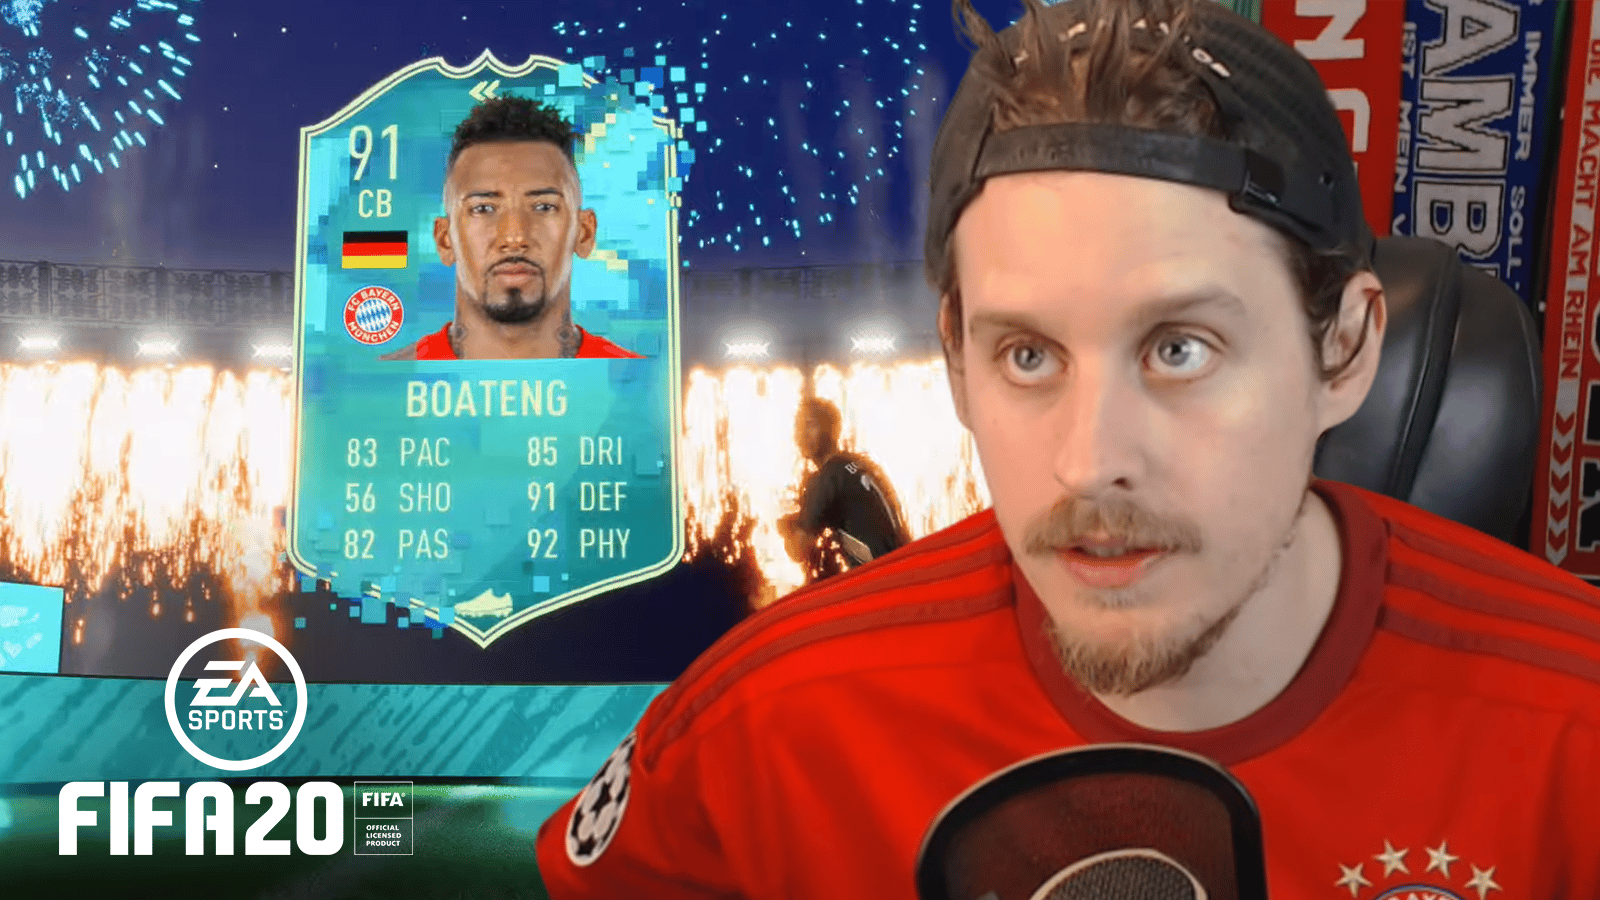 Zweback was certainly impressed by Jerome Boateng's new Flashback SBC card in FIFA 20